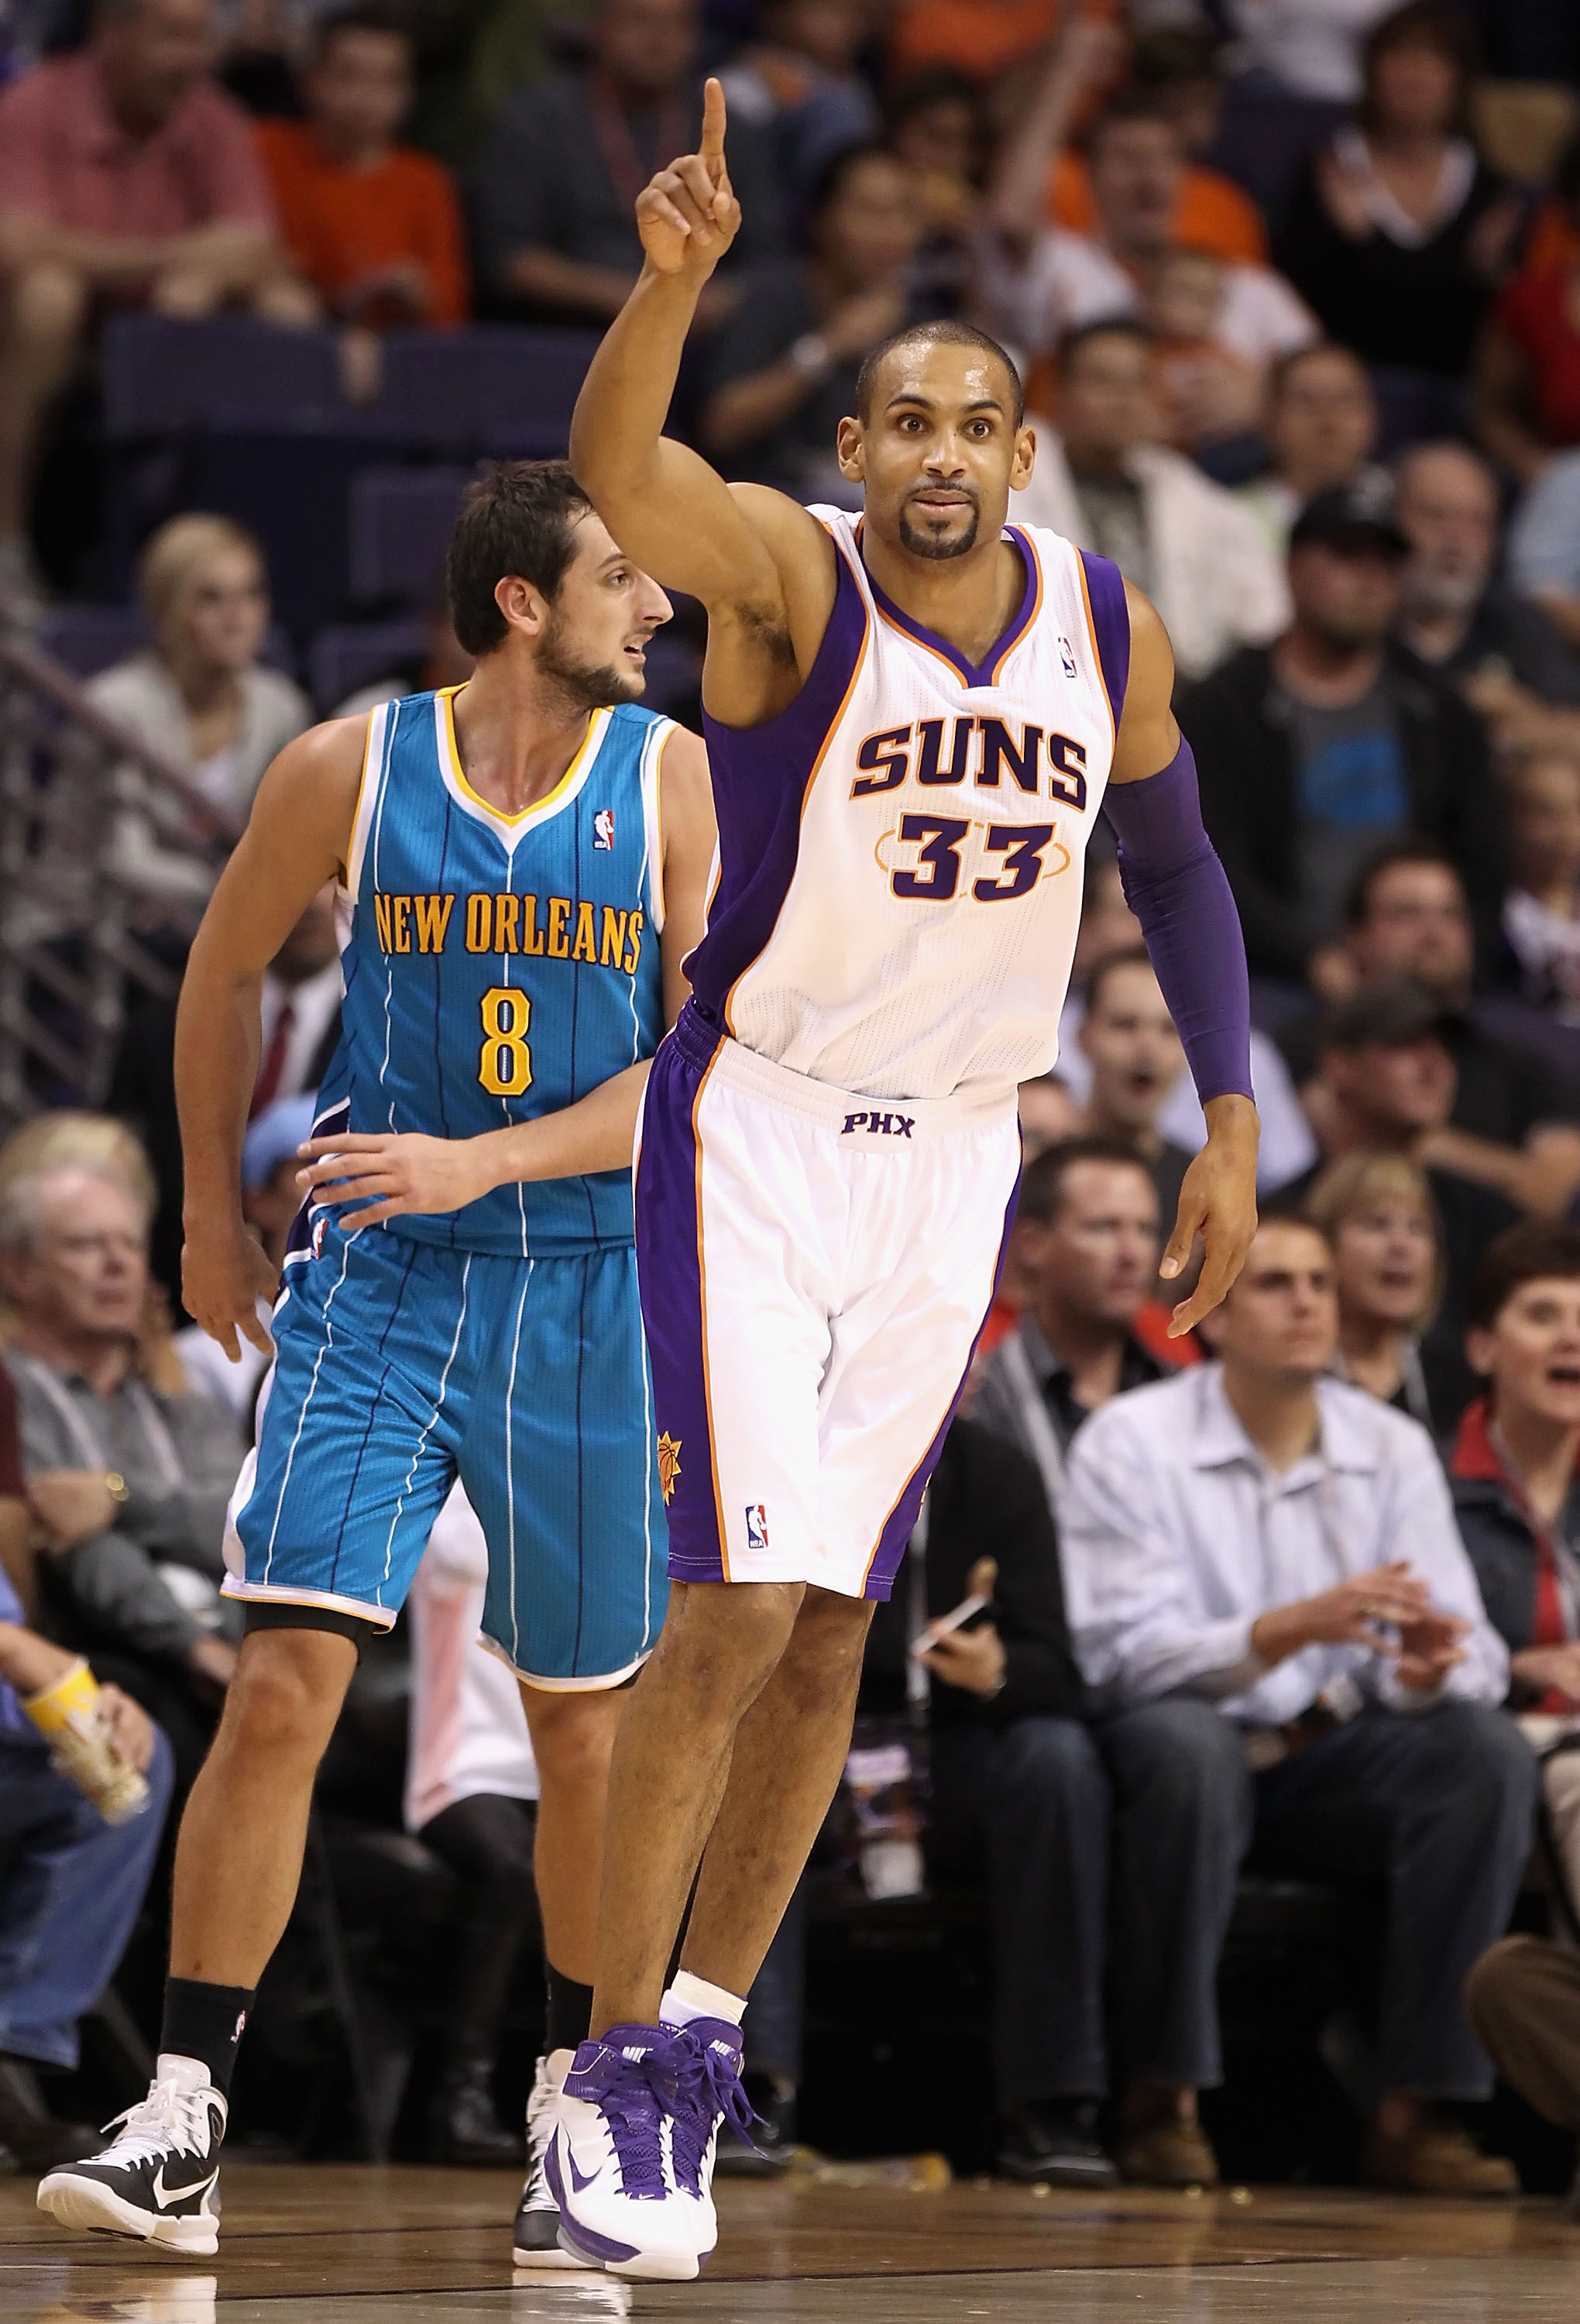 PHOENIX, AZ - JANUARY 30:  Grant Hill #33 of the Phoenix Suns reacts after hitting a three point shot past Marco Belinelli #8 of the New Orleans Hornets during the NBA game at US Airways Center on January 30, 2011 in Phoenix, Arizona.  The Suns defeated t